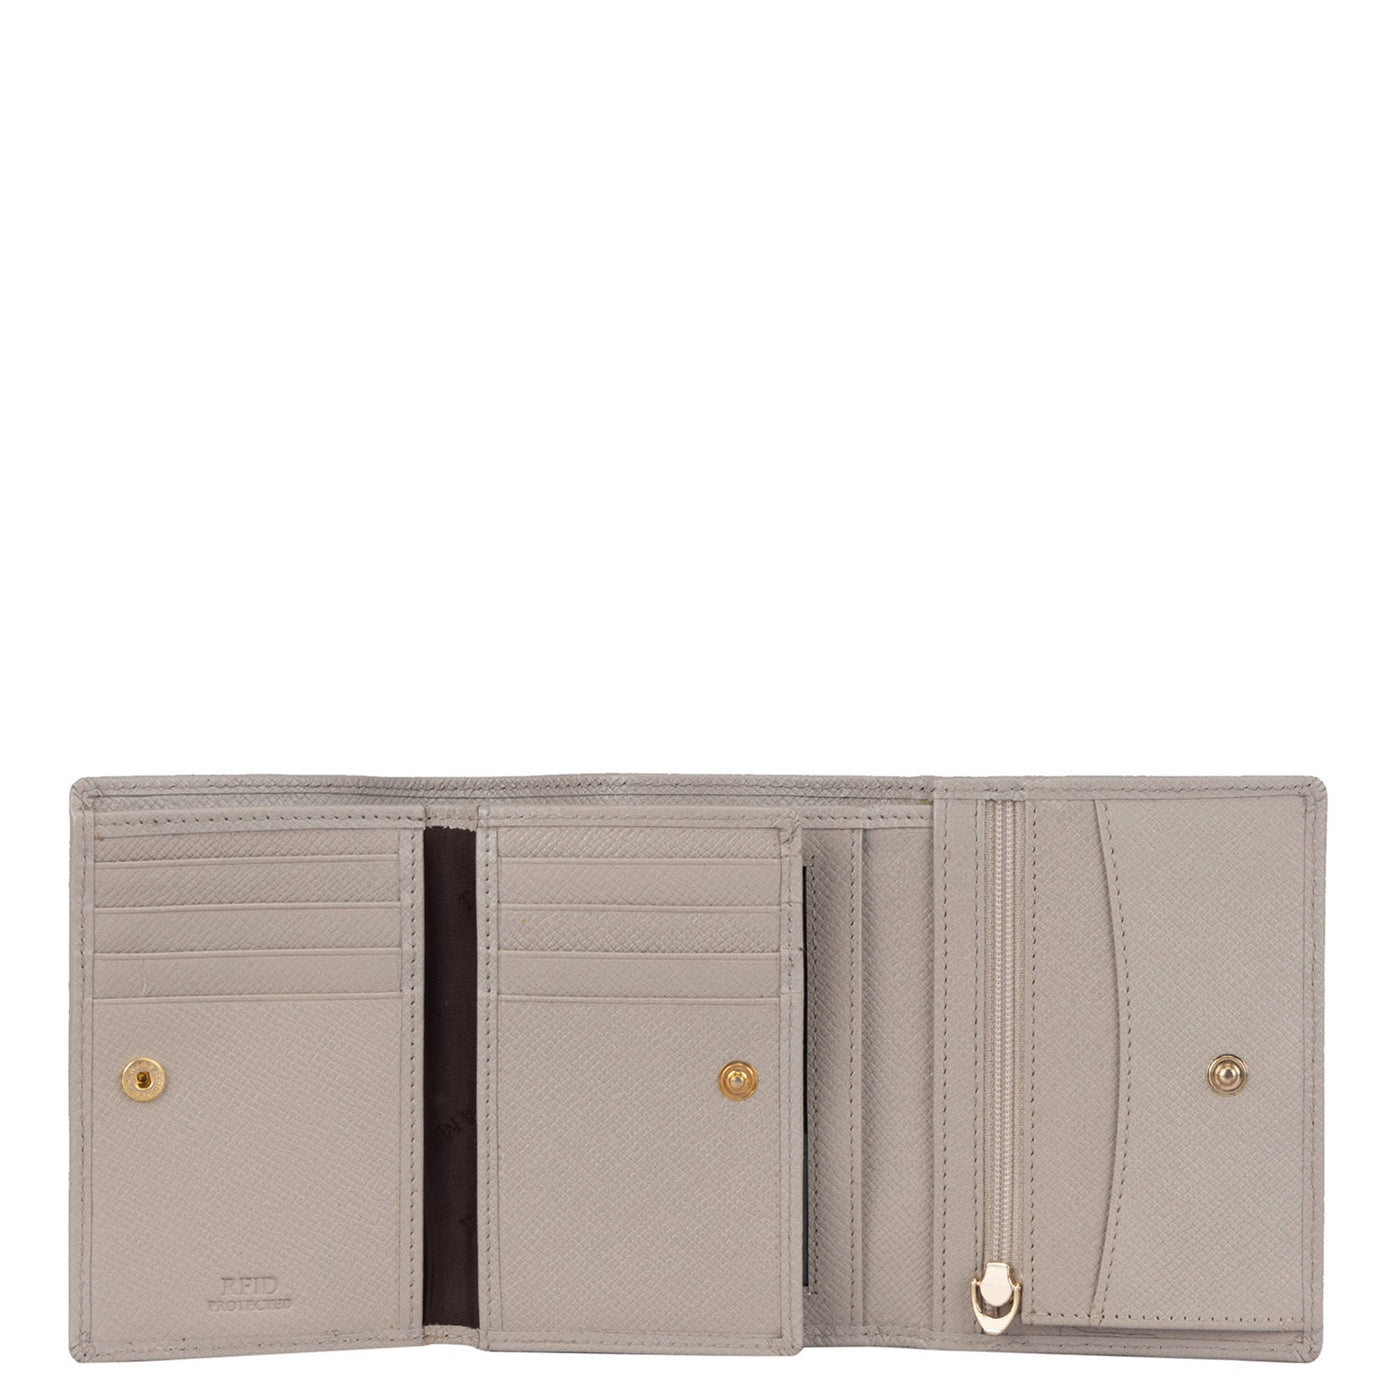 Franzy Leather Ladies Wallet - Ivory